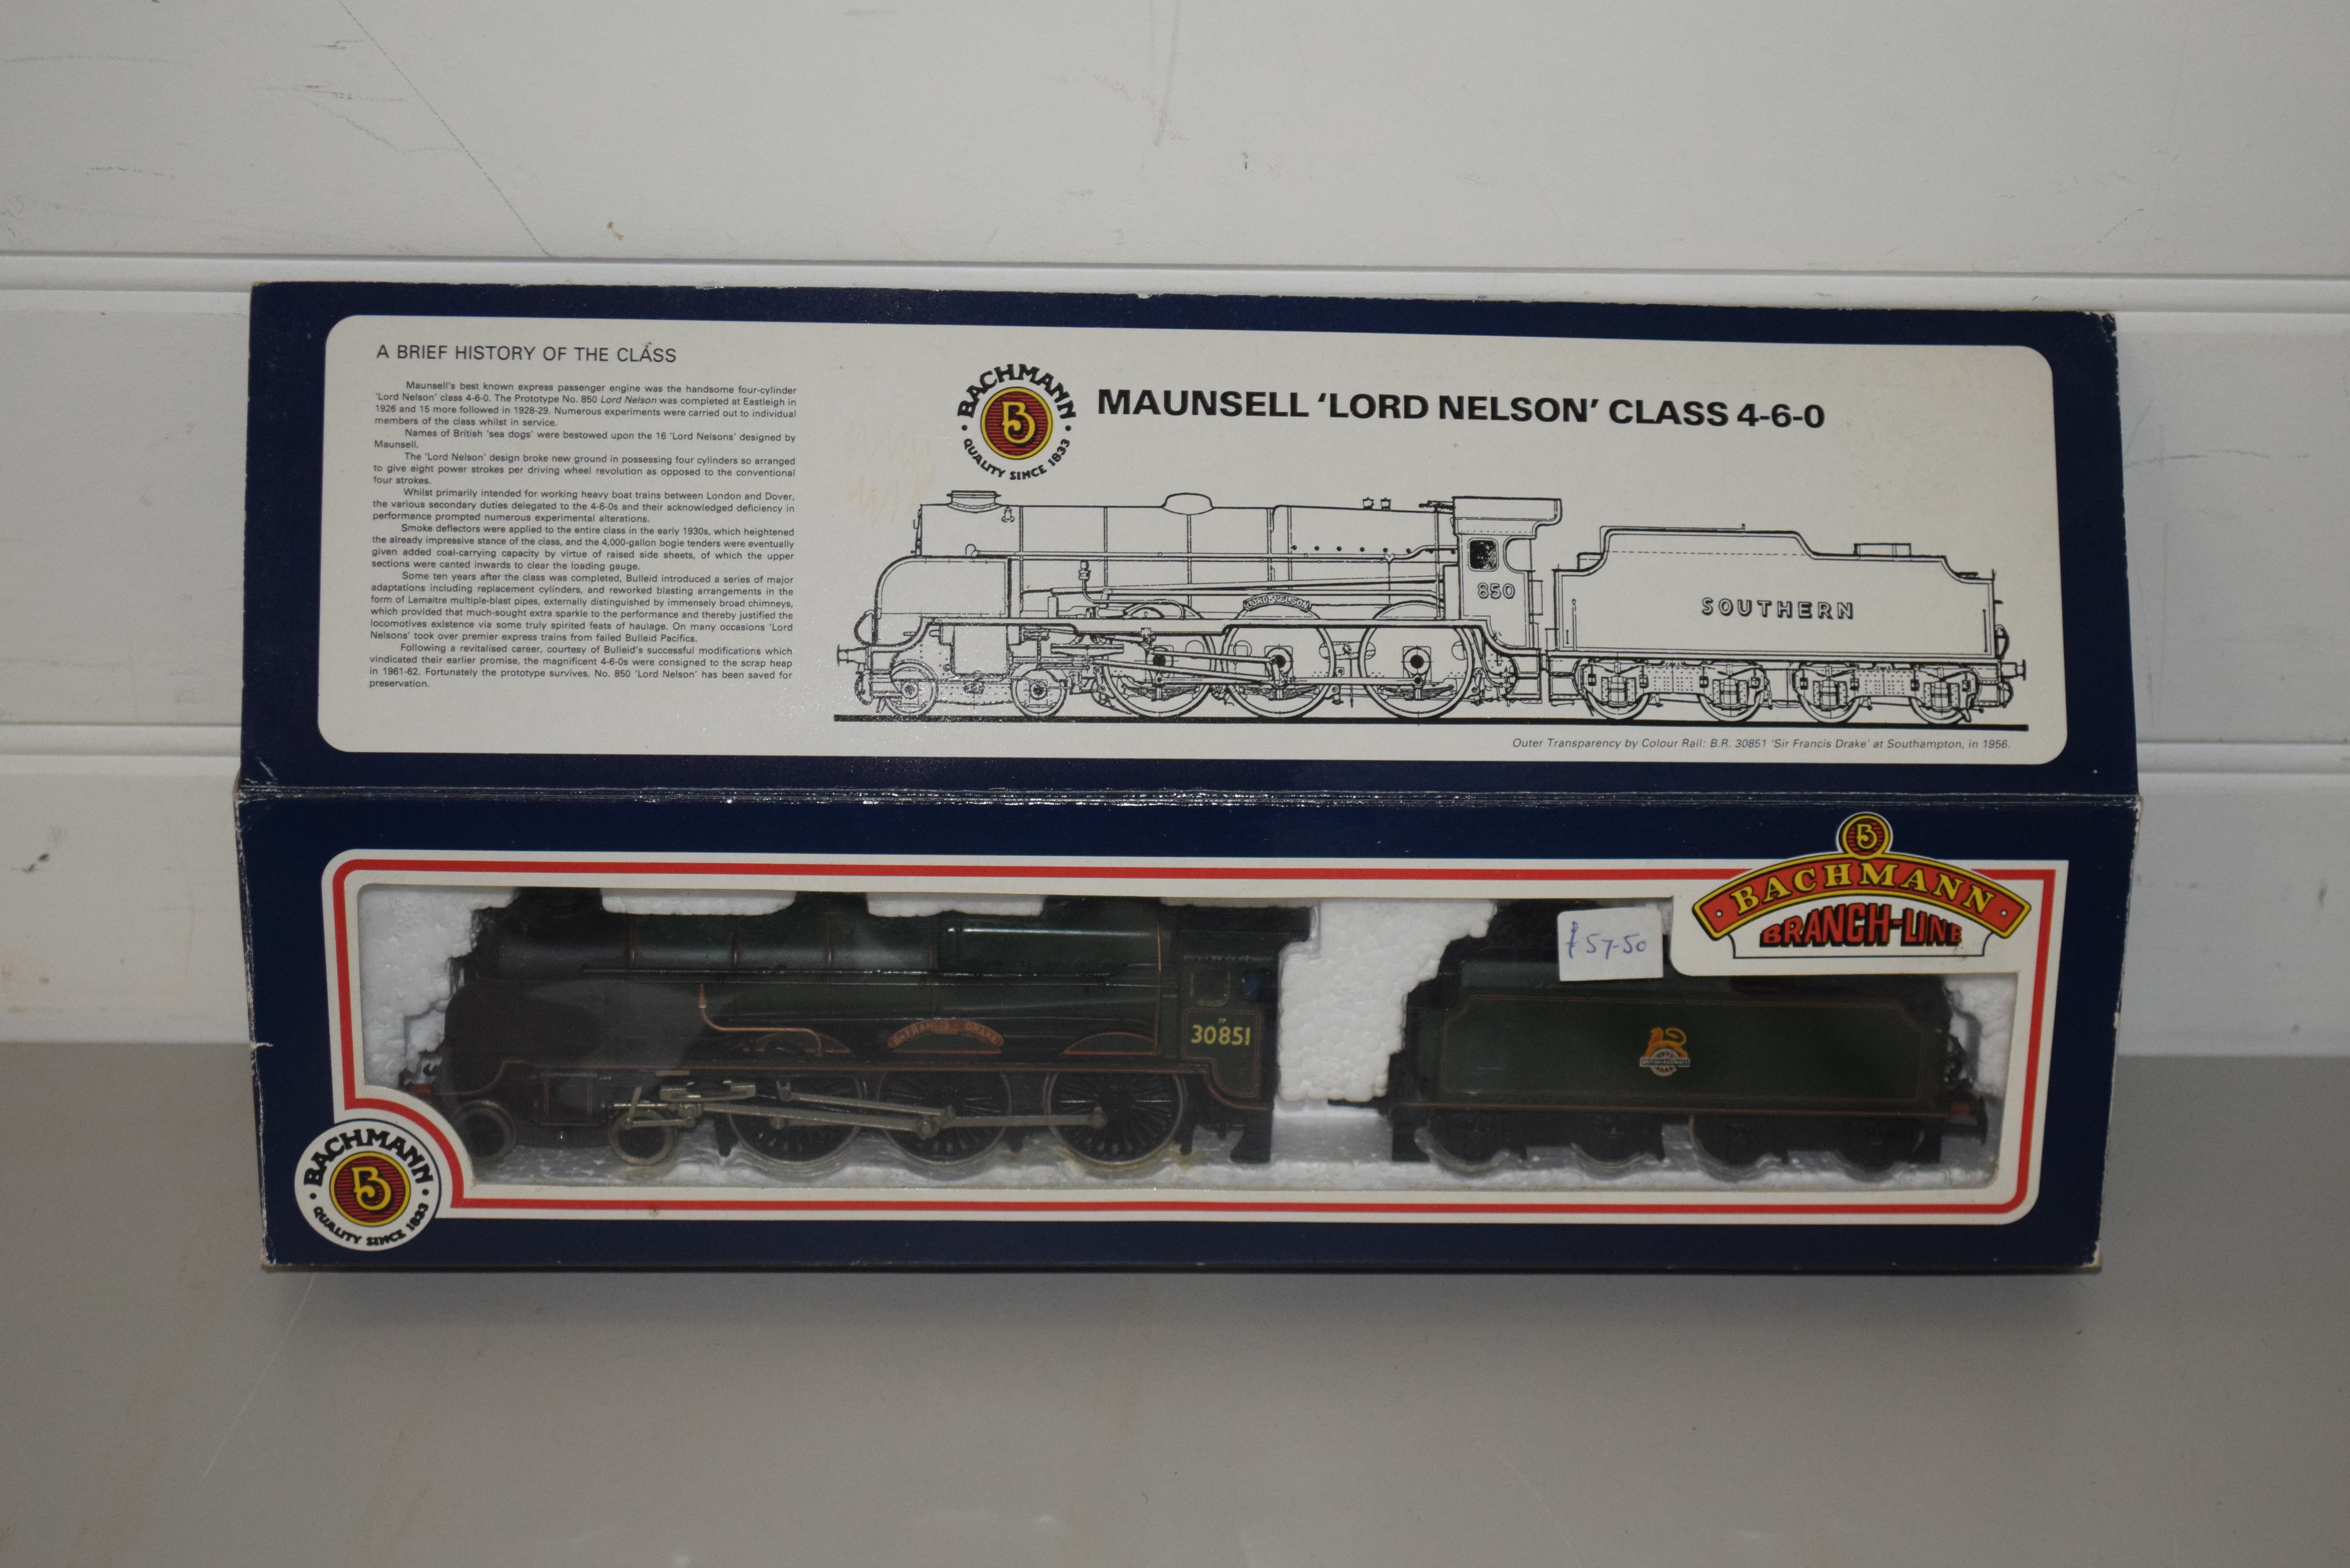 Boxed Bachmann 00 gauge 31-402 Lord Nelson "Sir Francis Drake" BR green No 30851 locomotive - Image 3 of 3